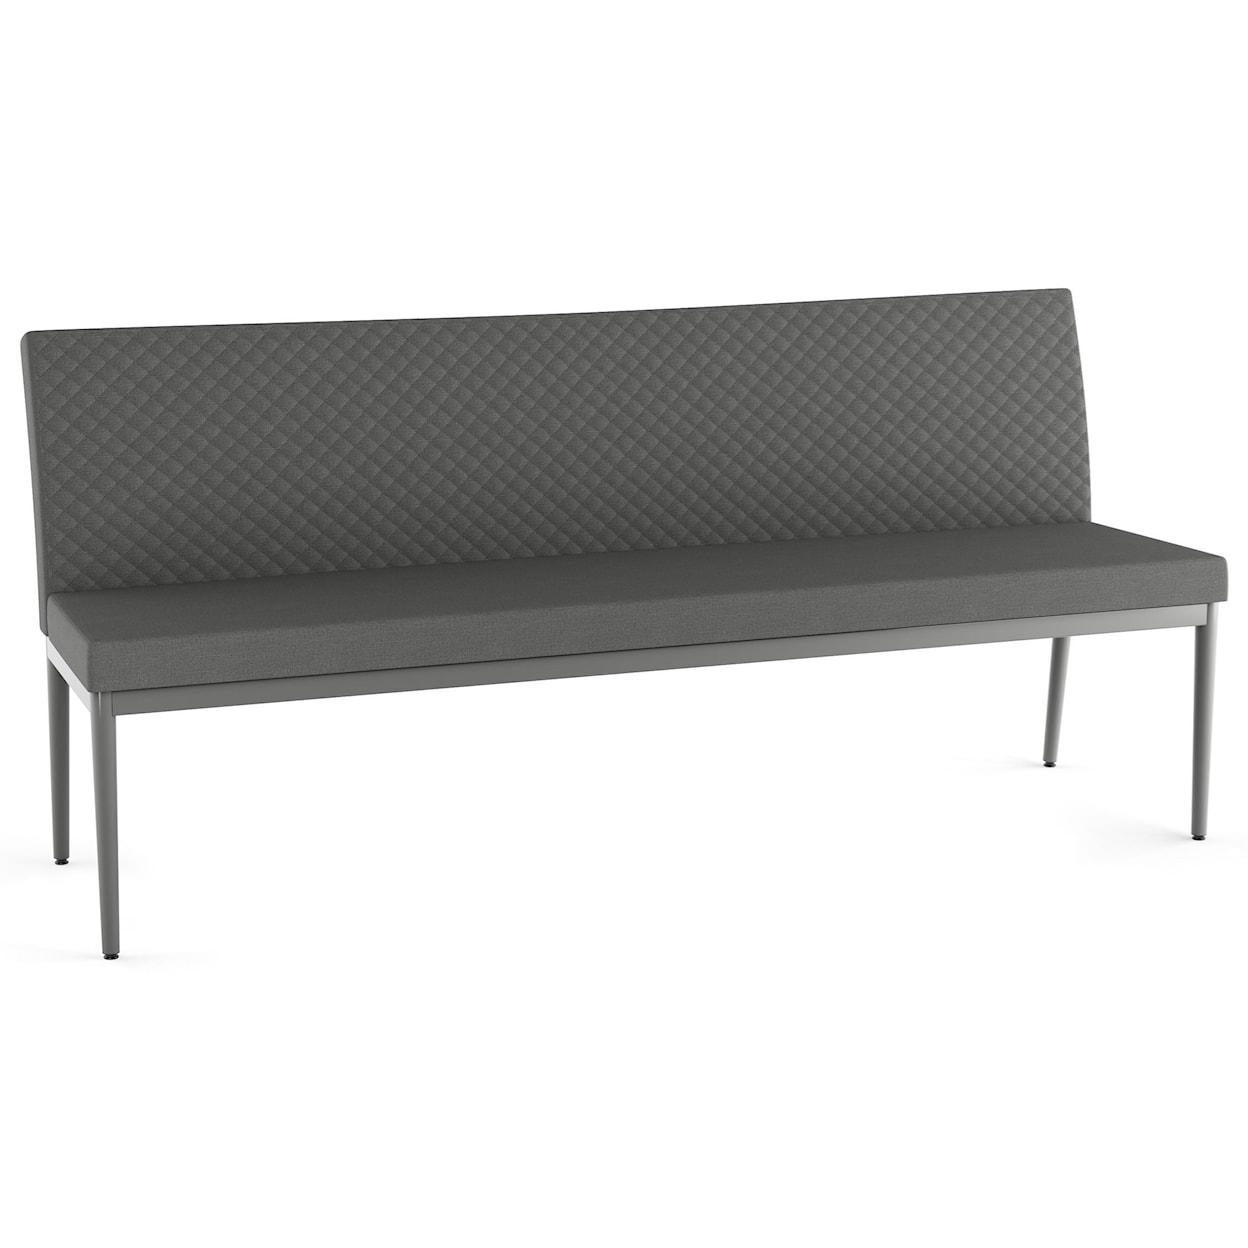 Amisco Urban Monroe Bench with Quilting